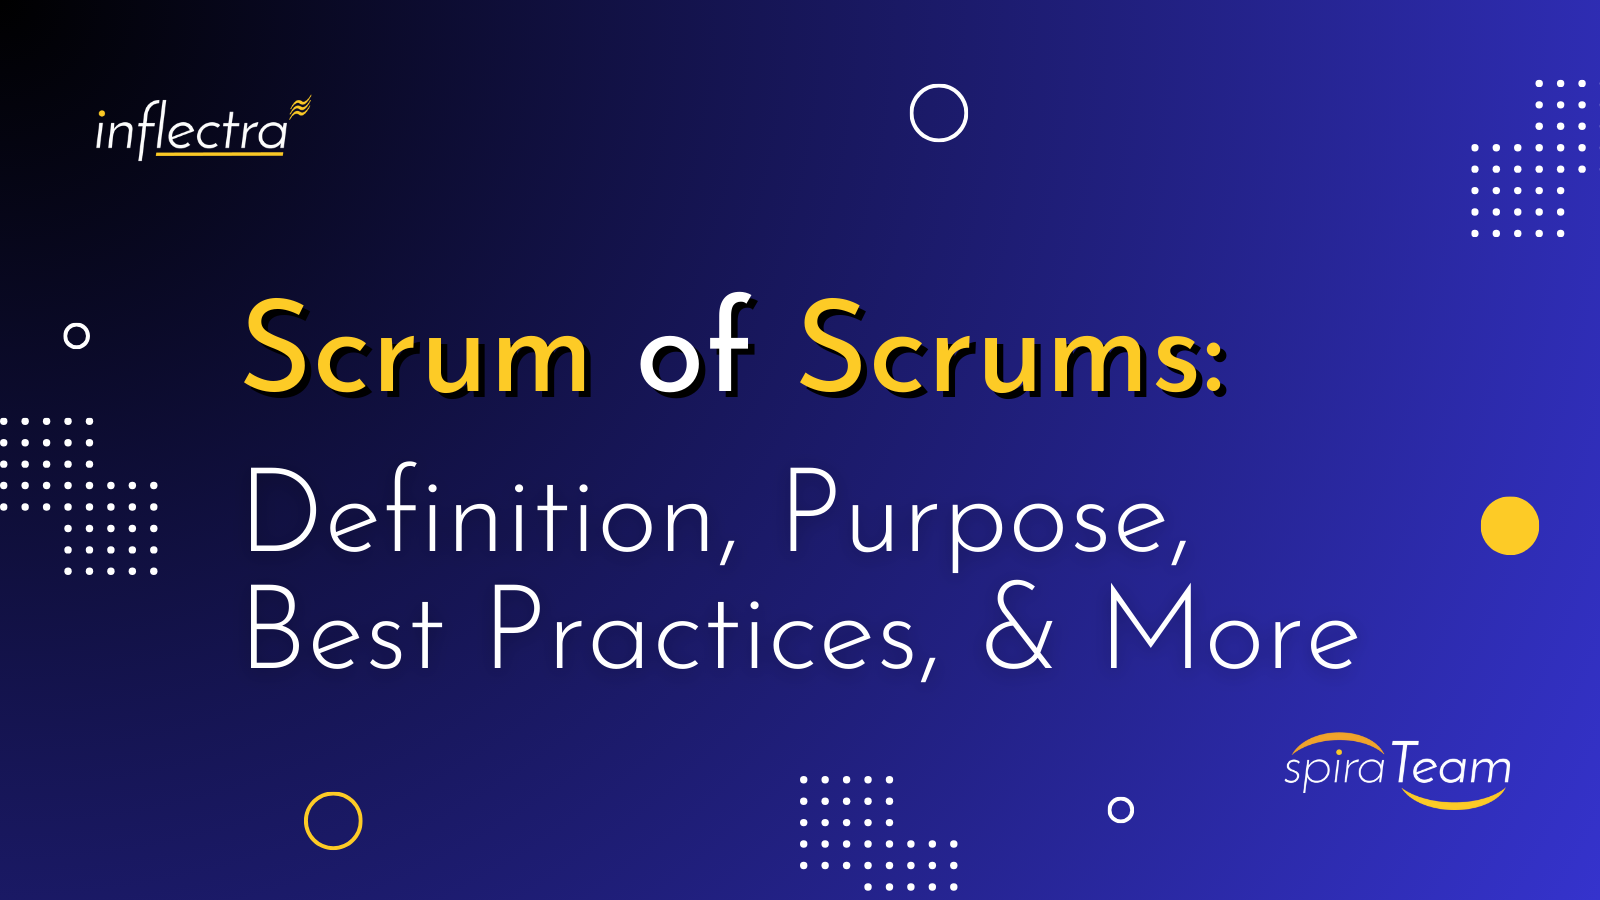 scrum-of-scrums-definition-purpose-best-practices-and-more-by-inflectra-image